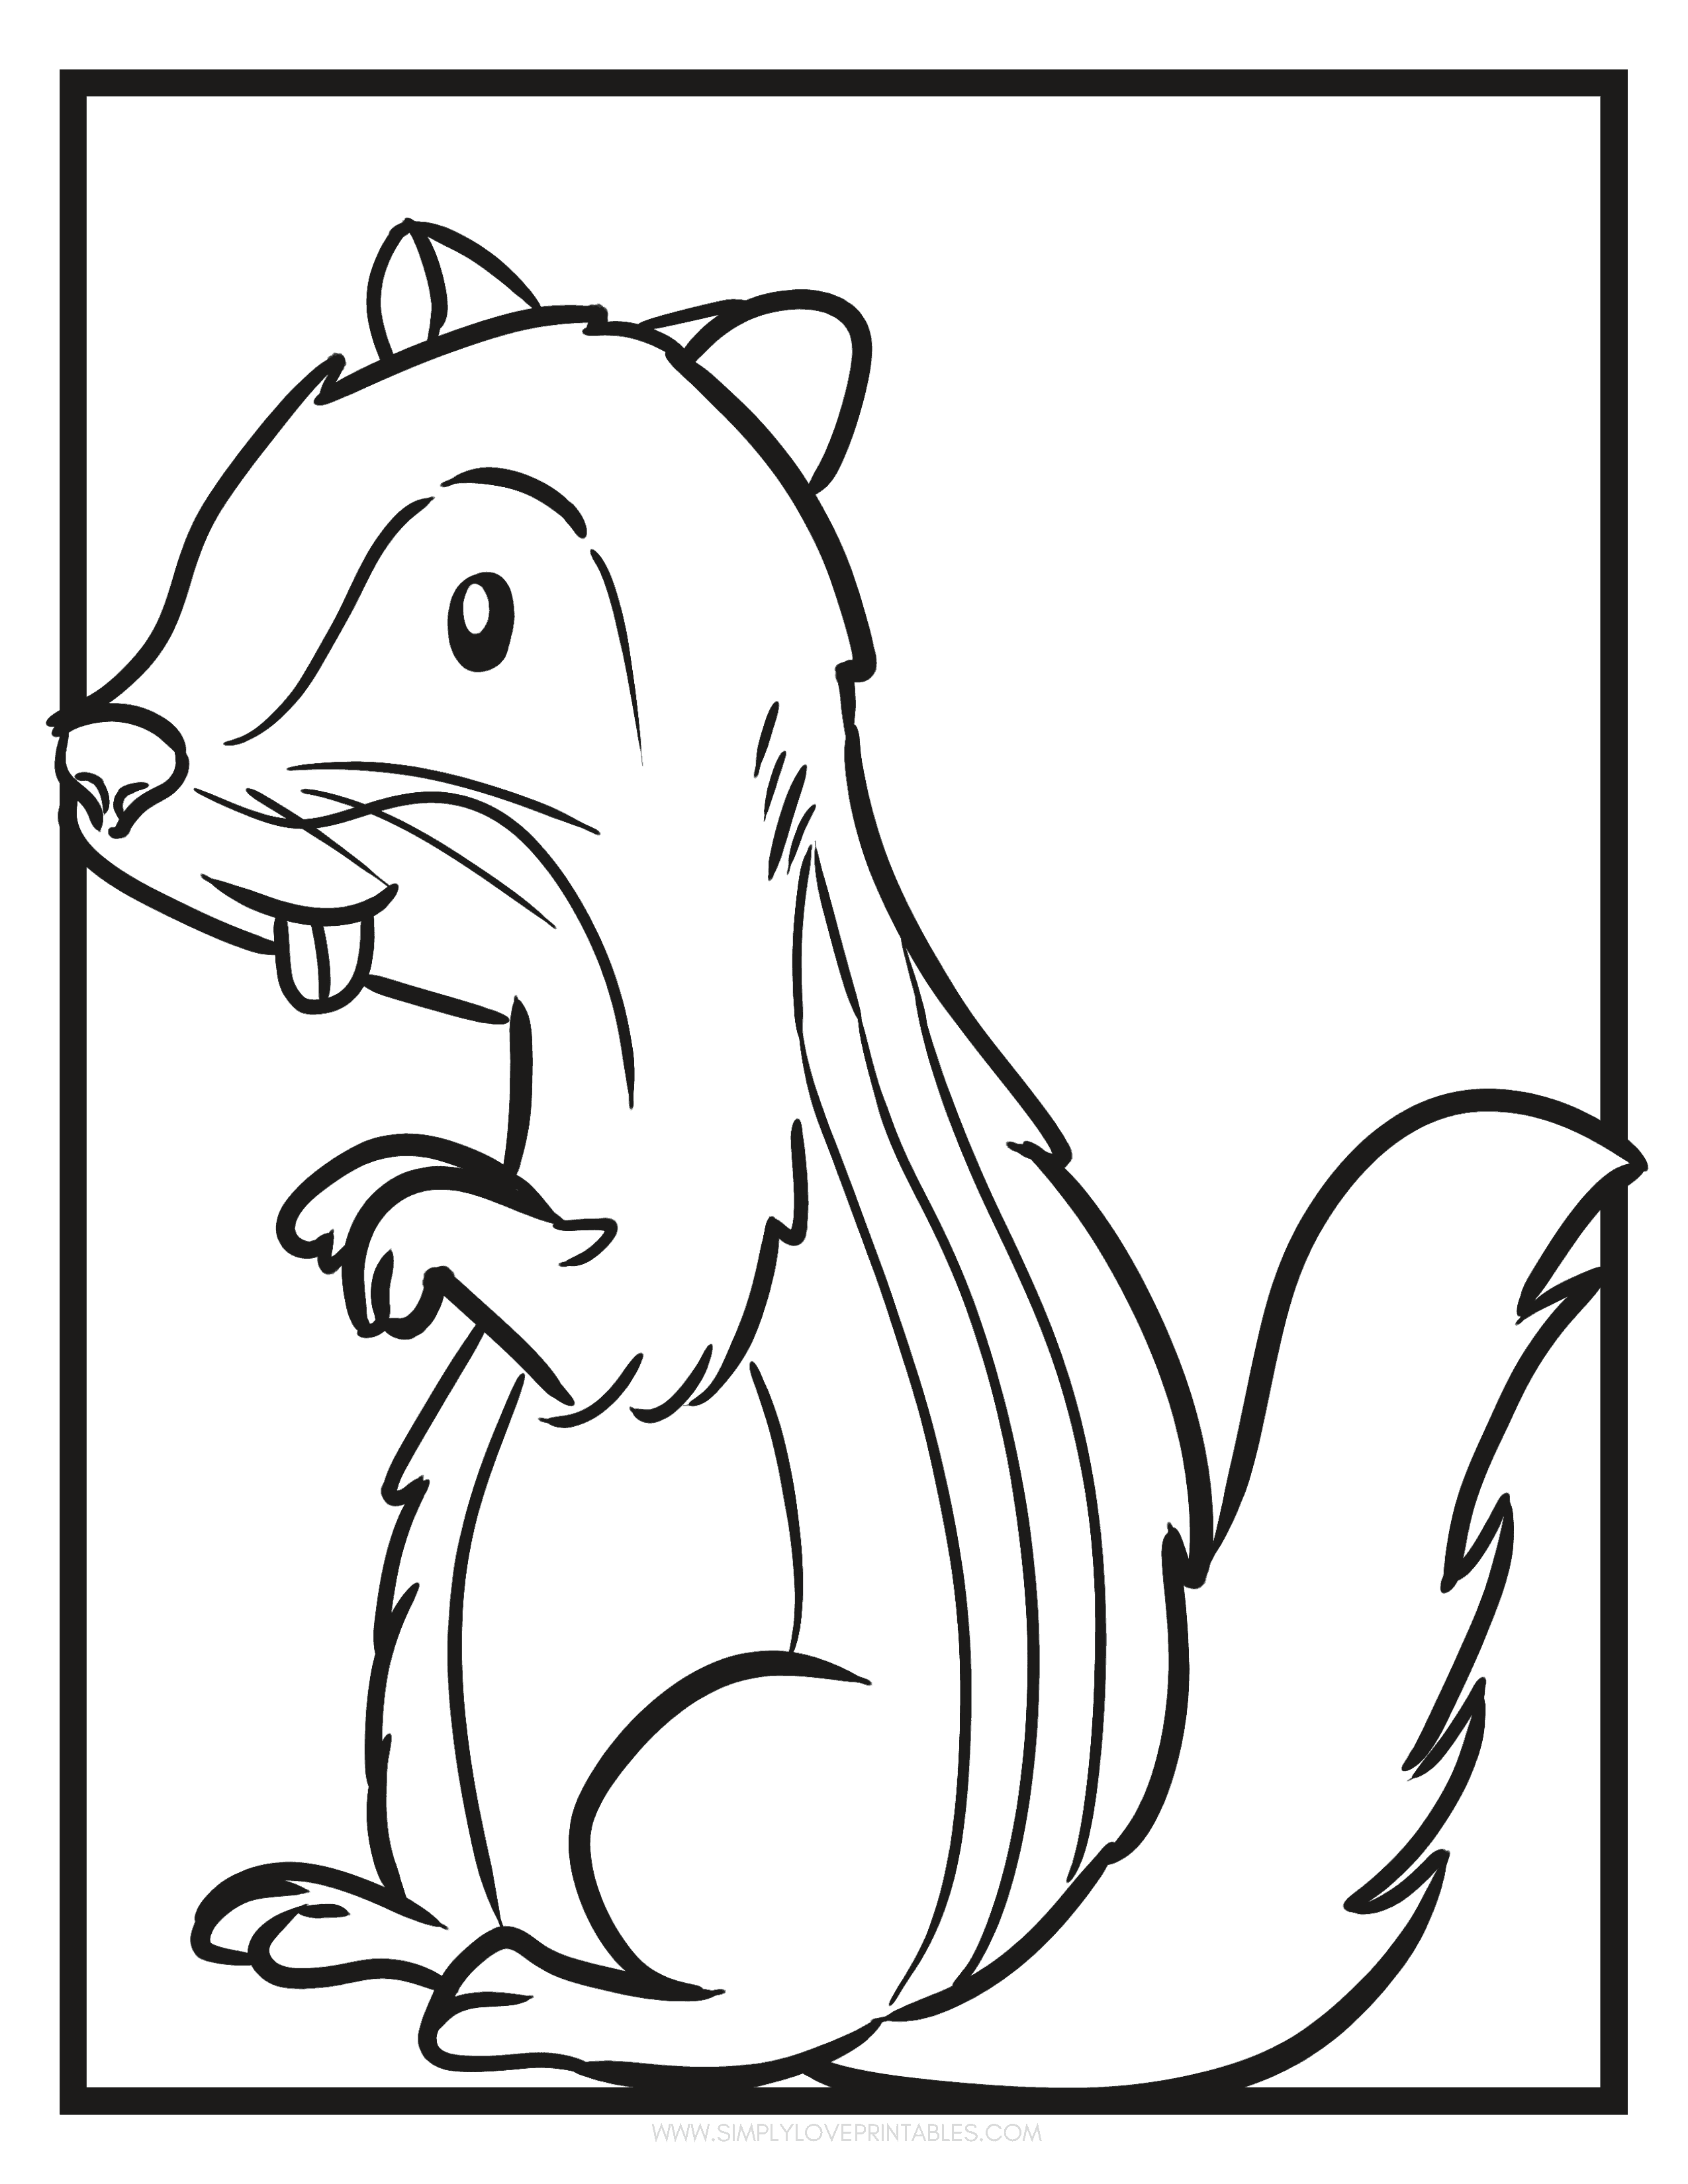 Free printable fall coloring pages simply love printables